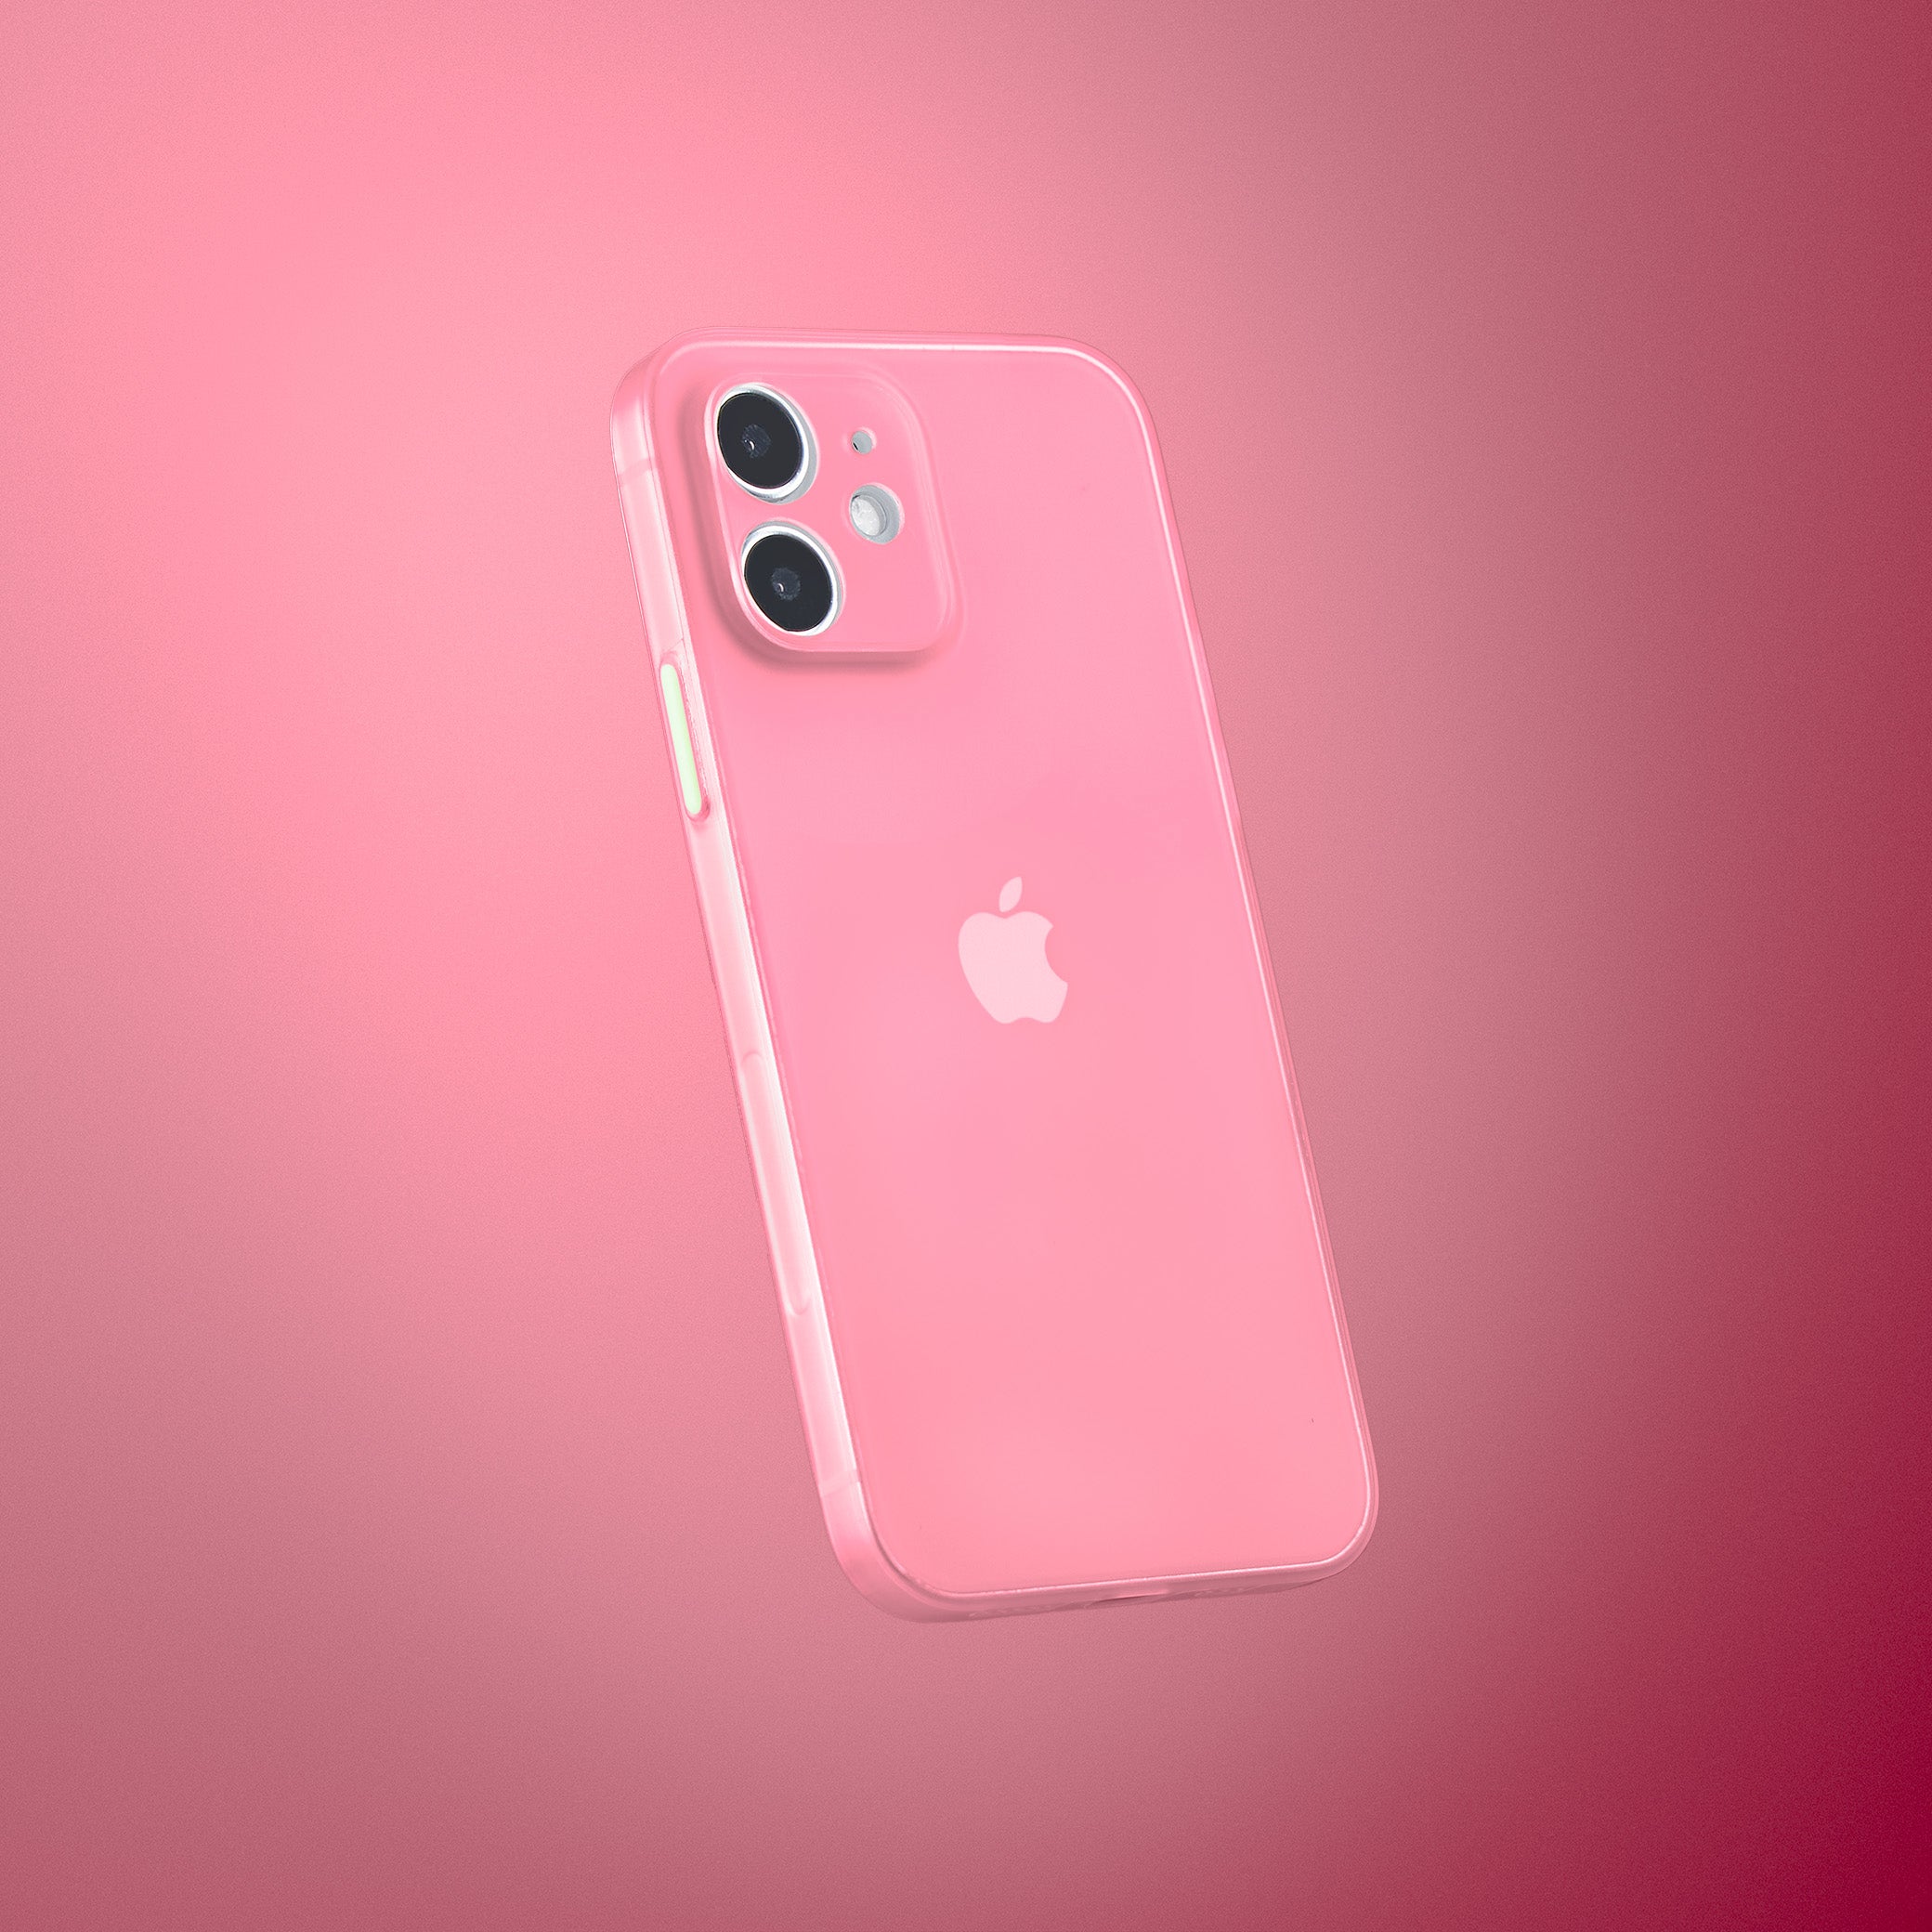 Super Slim Case 2.0 for iPhone 12 Mini - Pink Cotton Candy